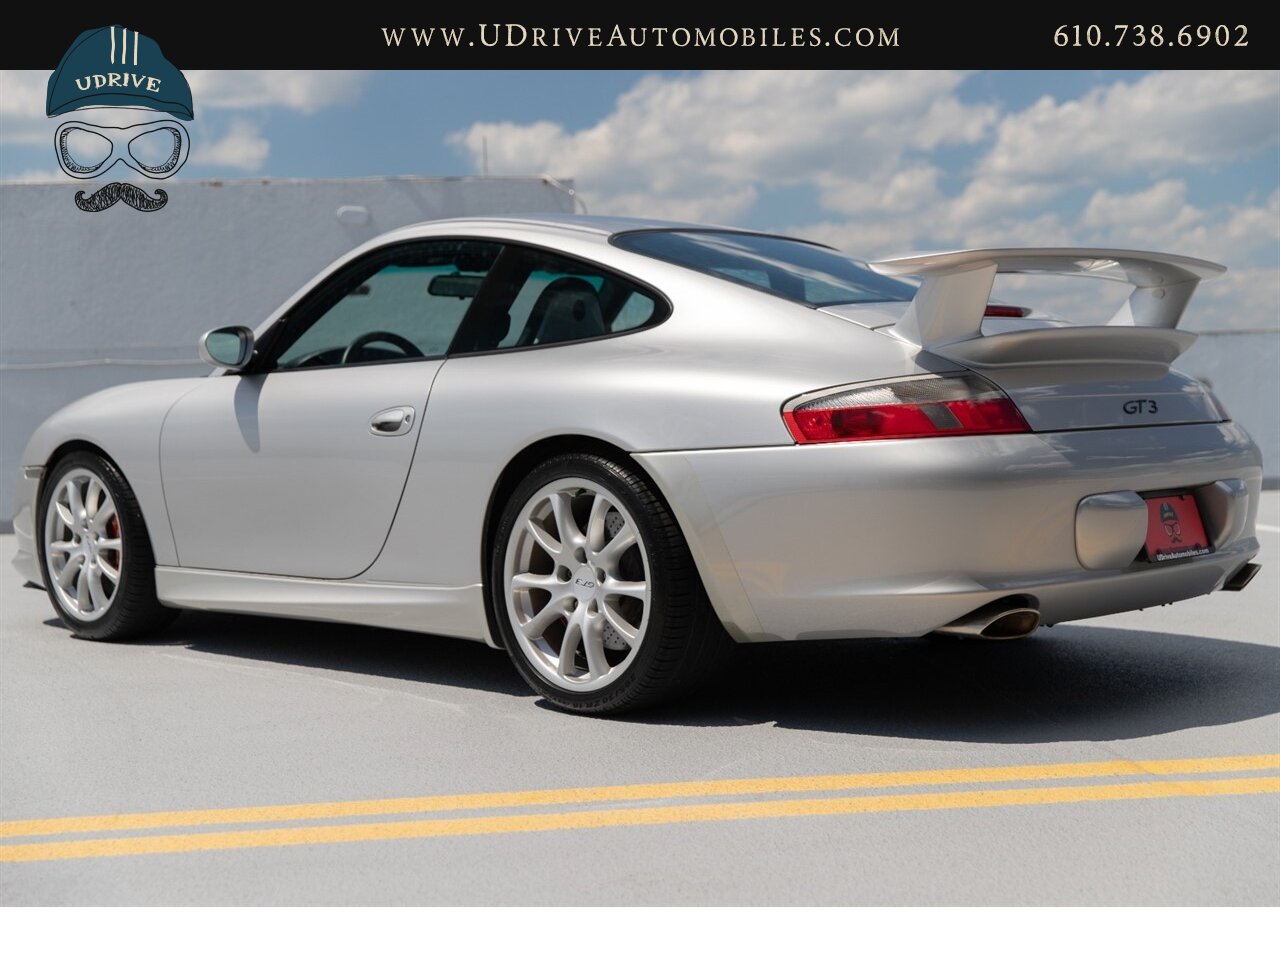 2004 Porsche 911 GT3 18k Miles Sport Seats Painted Hardback Seats  Thicker Steering Wheel Xenon Headlamps - Photo 23 - West Chester, PA 19382